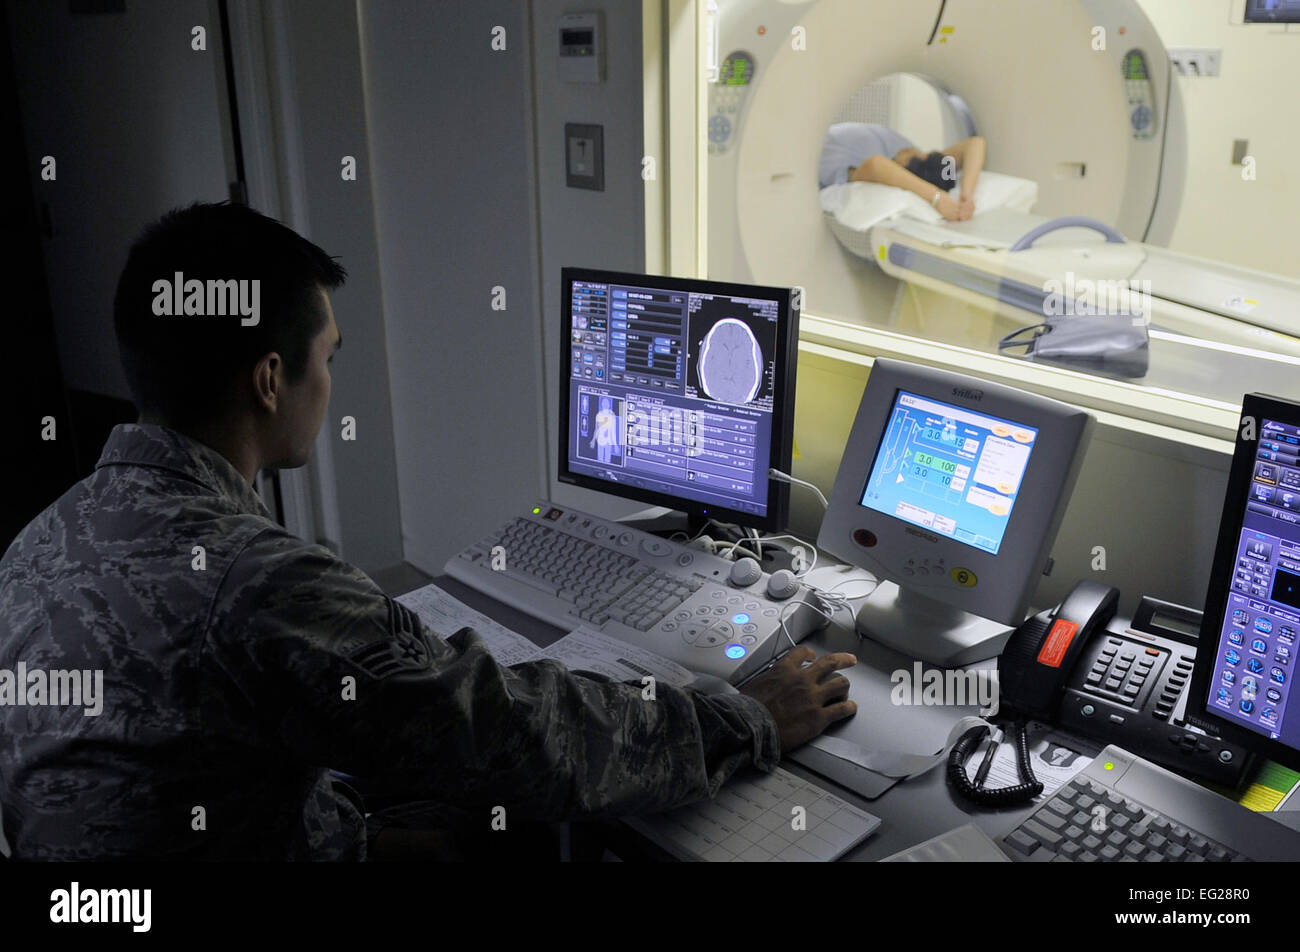 Senior Airman James Lord starts a CT scan Aug. 27, 2013, at Misawa Air Base, Japan. With this monitor, technologists can start and control a scan without being in the same room as the patient or machine. Lord is a 35th Surgical Operations Squadron diagnostic imaging technologist. Airman 1st Class Zachary Kee Stock Photo